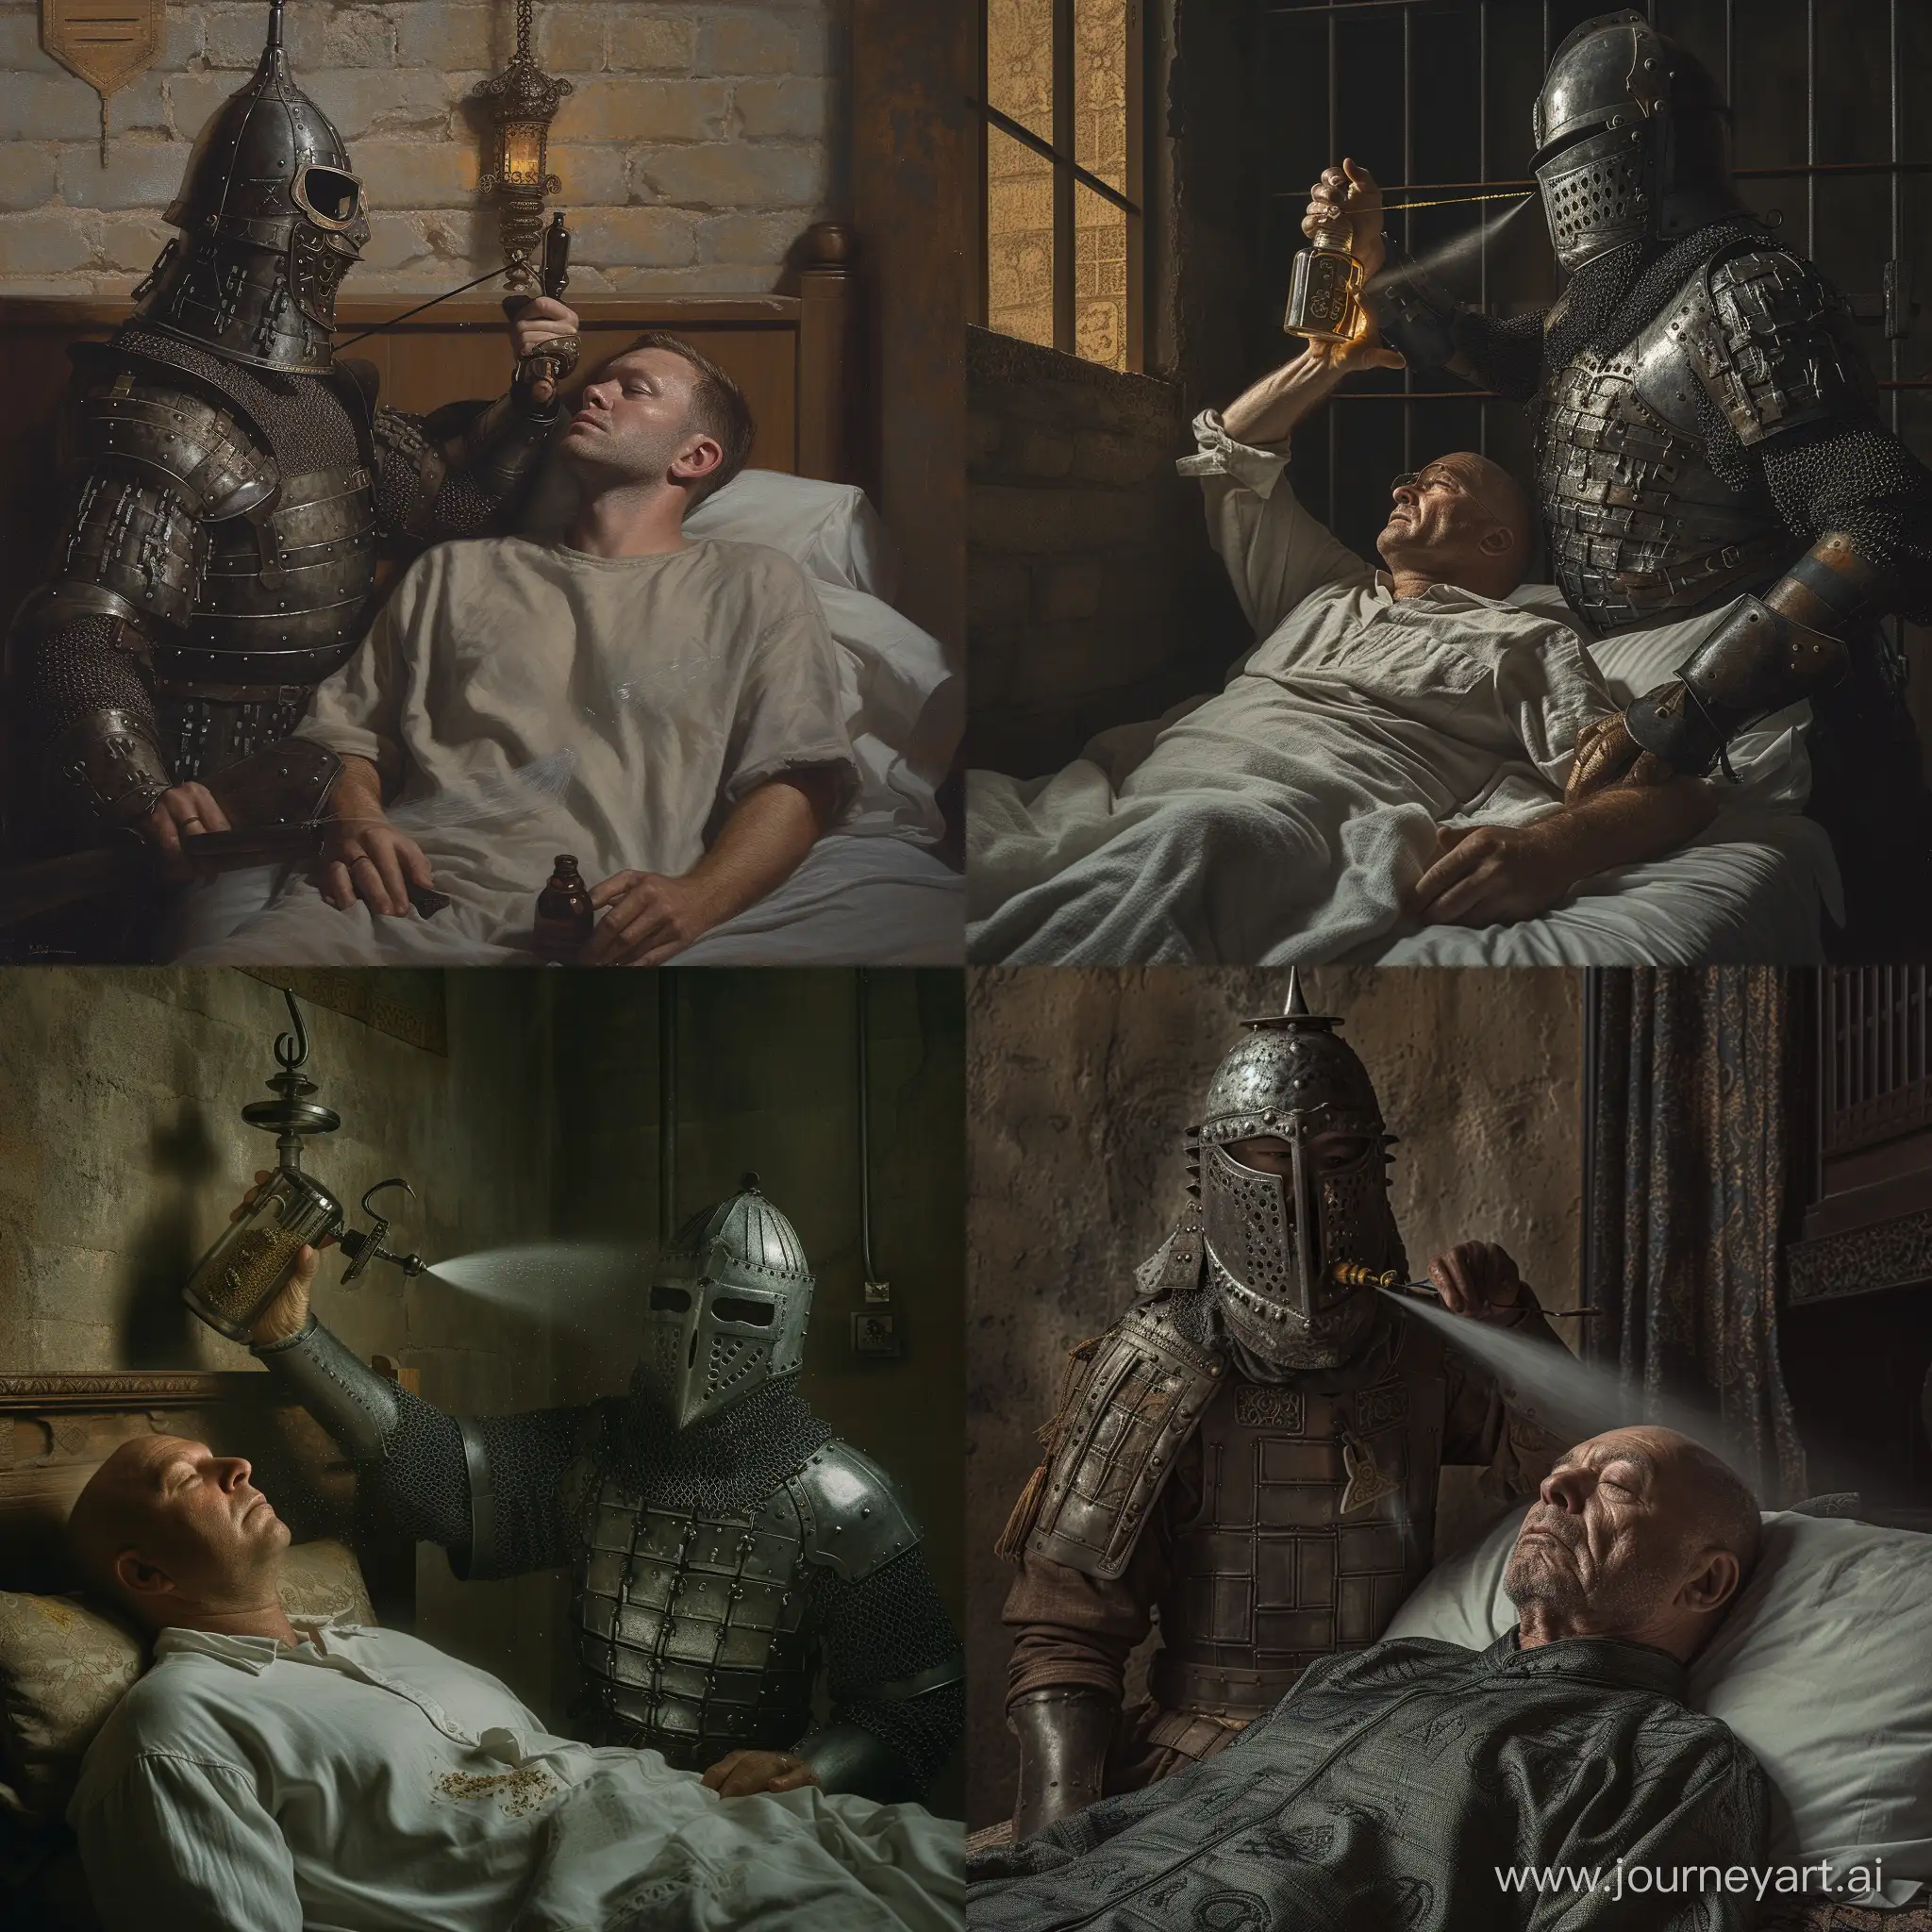 Realistic. Sam Bankman-Fried lying on bed in a luxury prison cell. He is being sprayed with seed oils by a Medieval Chinese warrior in metal armor with visor helmet.